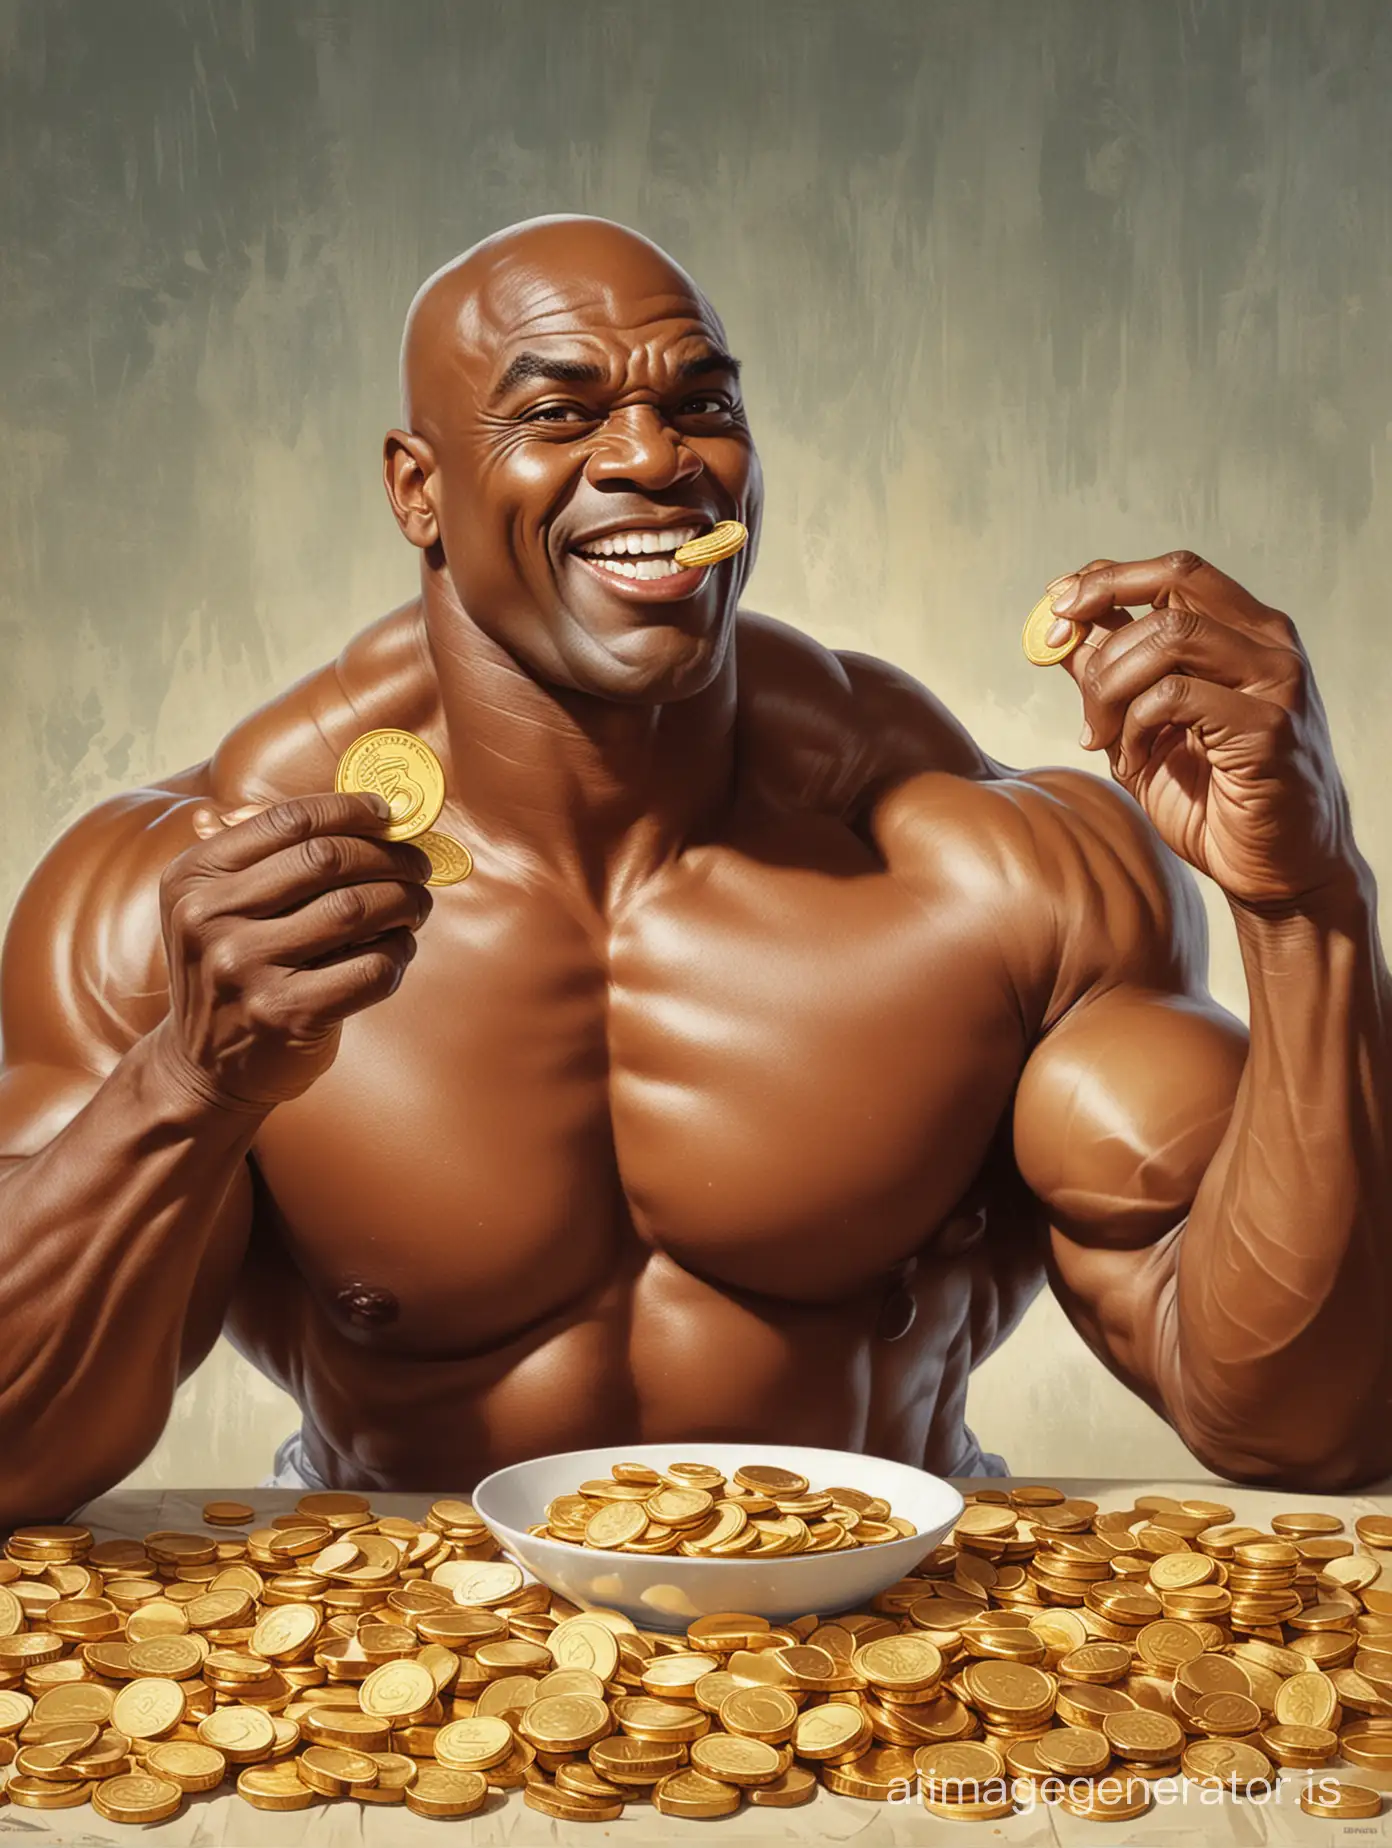 Vintage-Communist-Propaganda-Poster-Illustration-of-Ronnie-Coleman-Eating-Gold-Coins-for-Breakfast-and-Pointing-Up